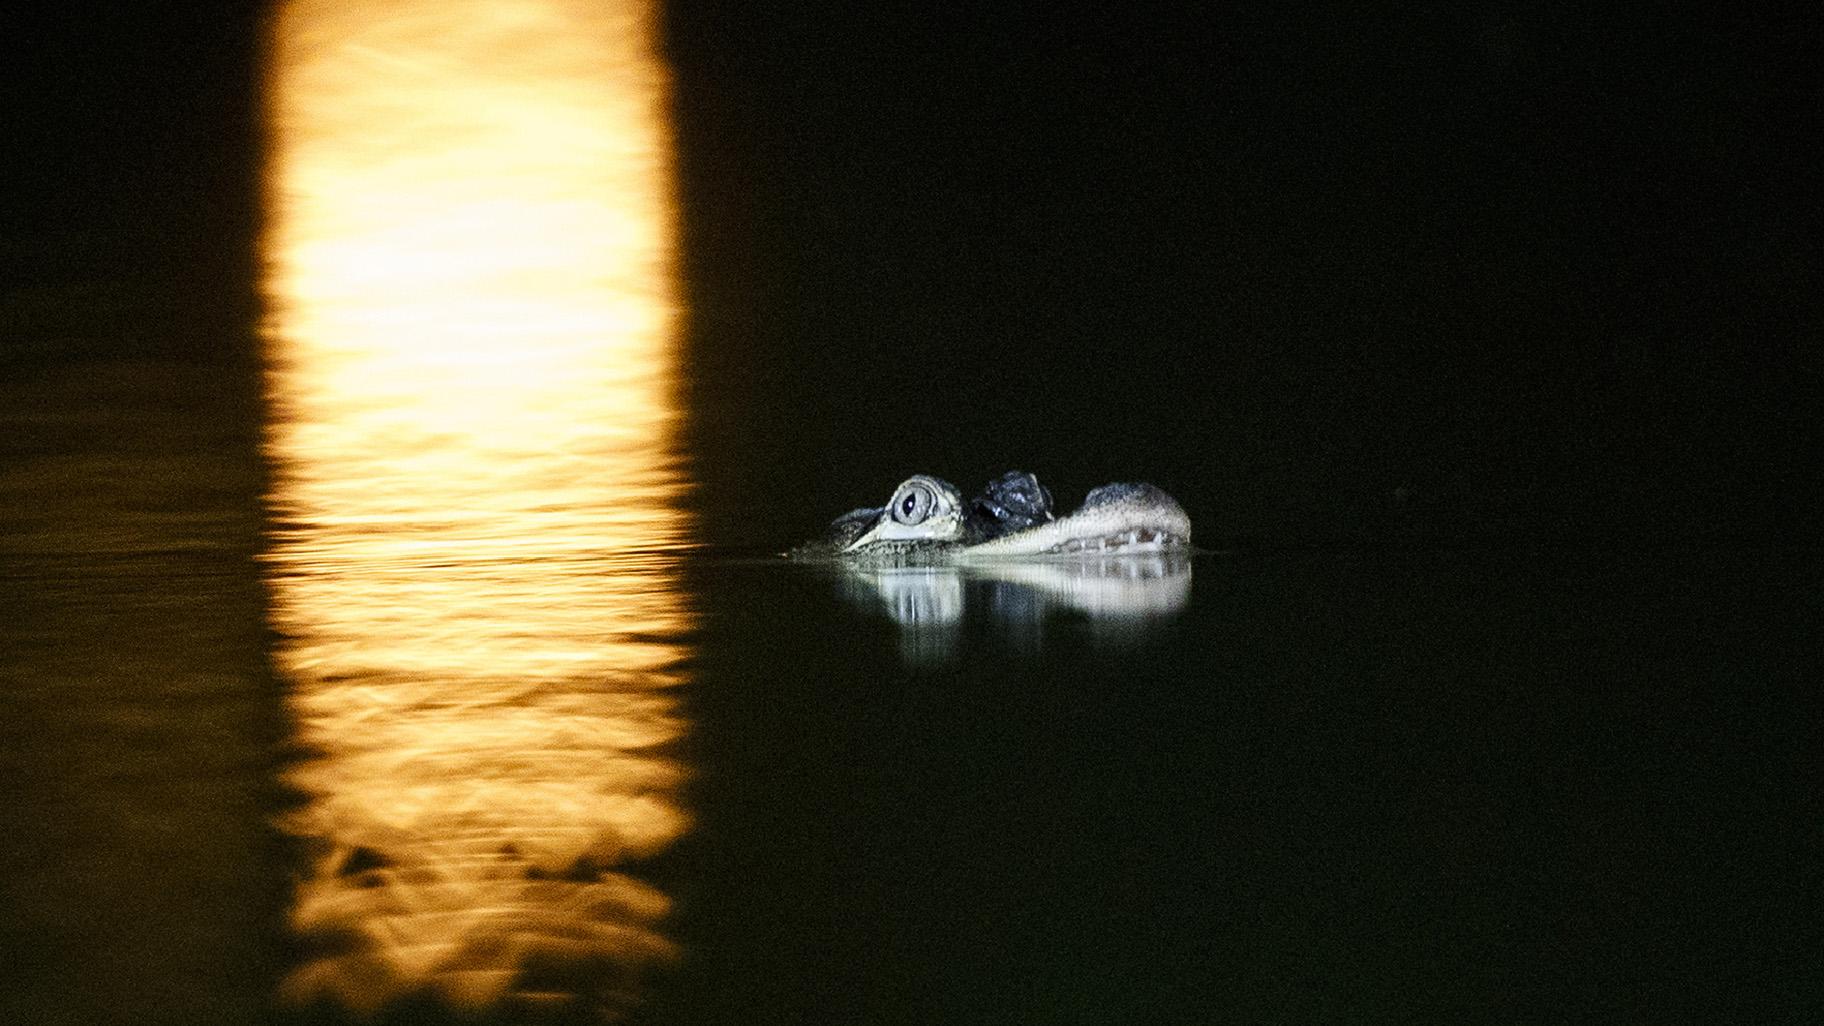 An alligator floats in the Humboldt Park Lagoon on Tuesday, July 9, 2019, in Chicago. Officials couldn’t say how the creature got there, but traps are being placed around the lagoon in hopes the animal will swim into one and be safely removed. (Armando L. Sanchez / Chicago Tribune via AP)